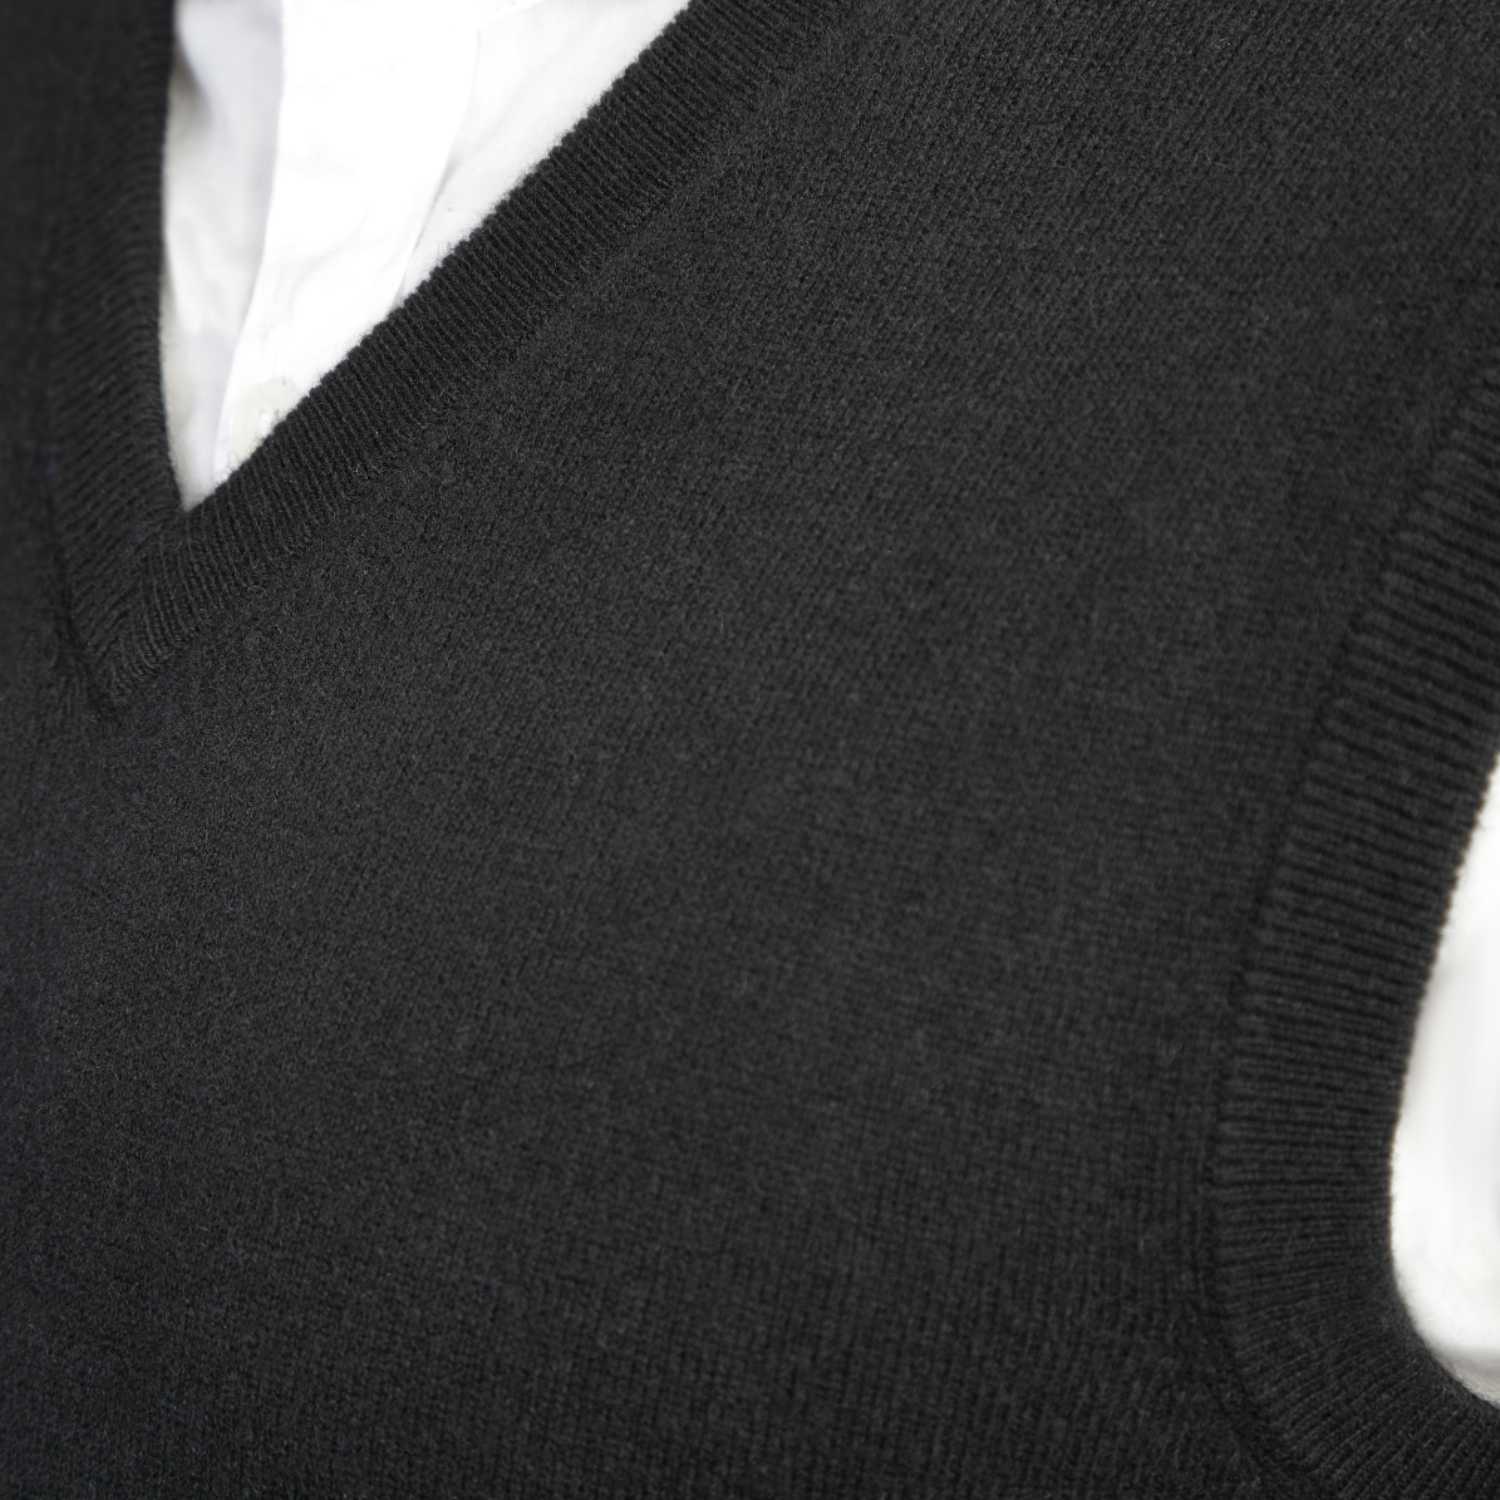 Mens Black Cashmere Sleeveless Vest Sweater | Close up | Shop at The Cashmere Choice | London